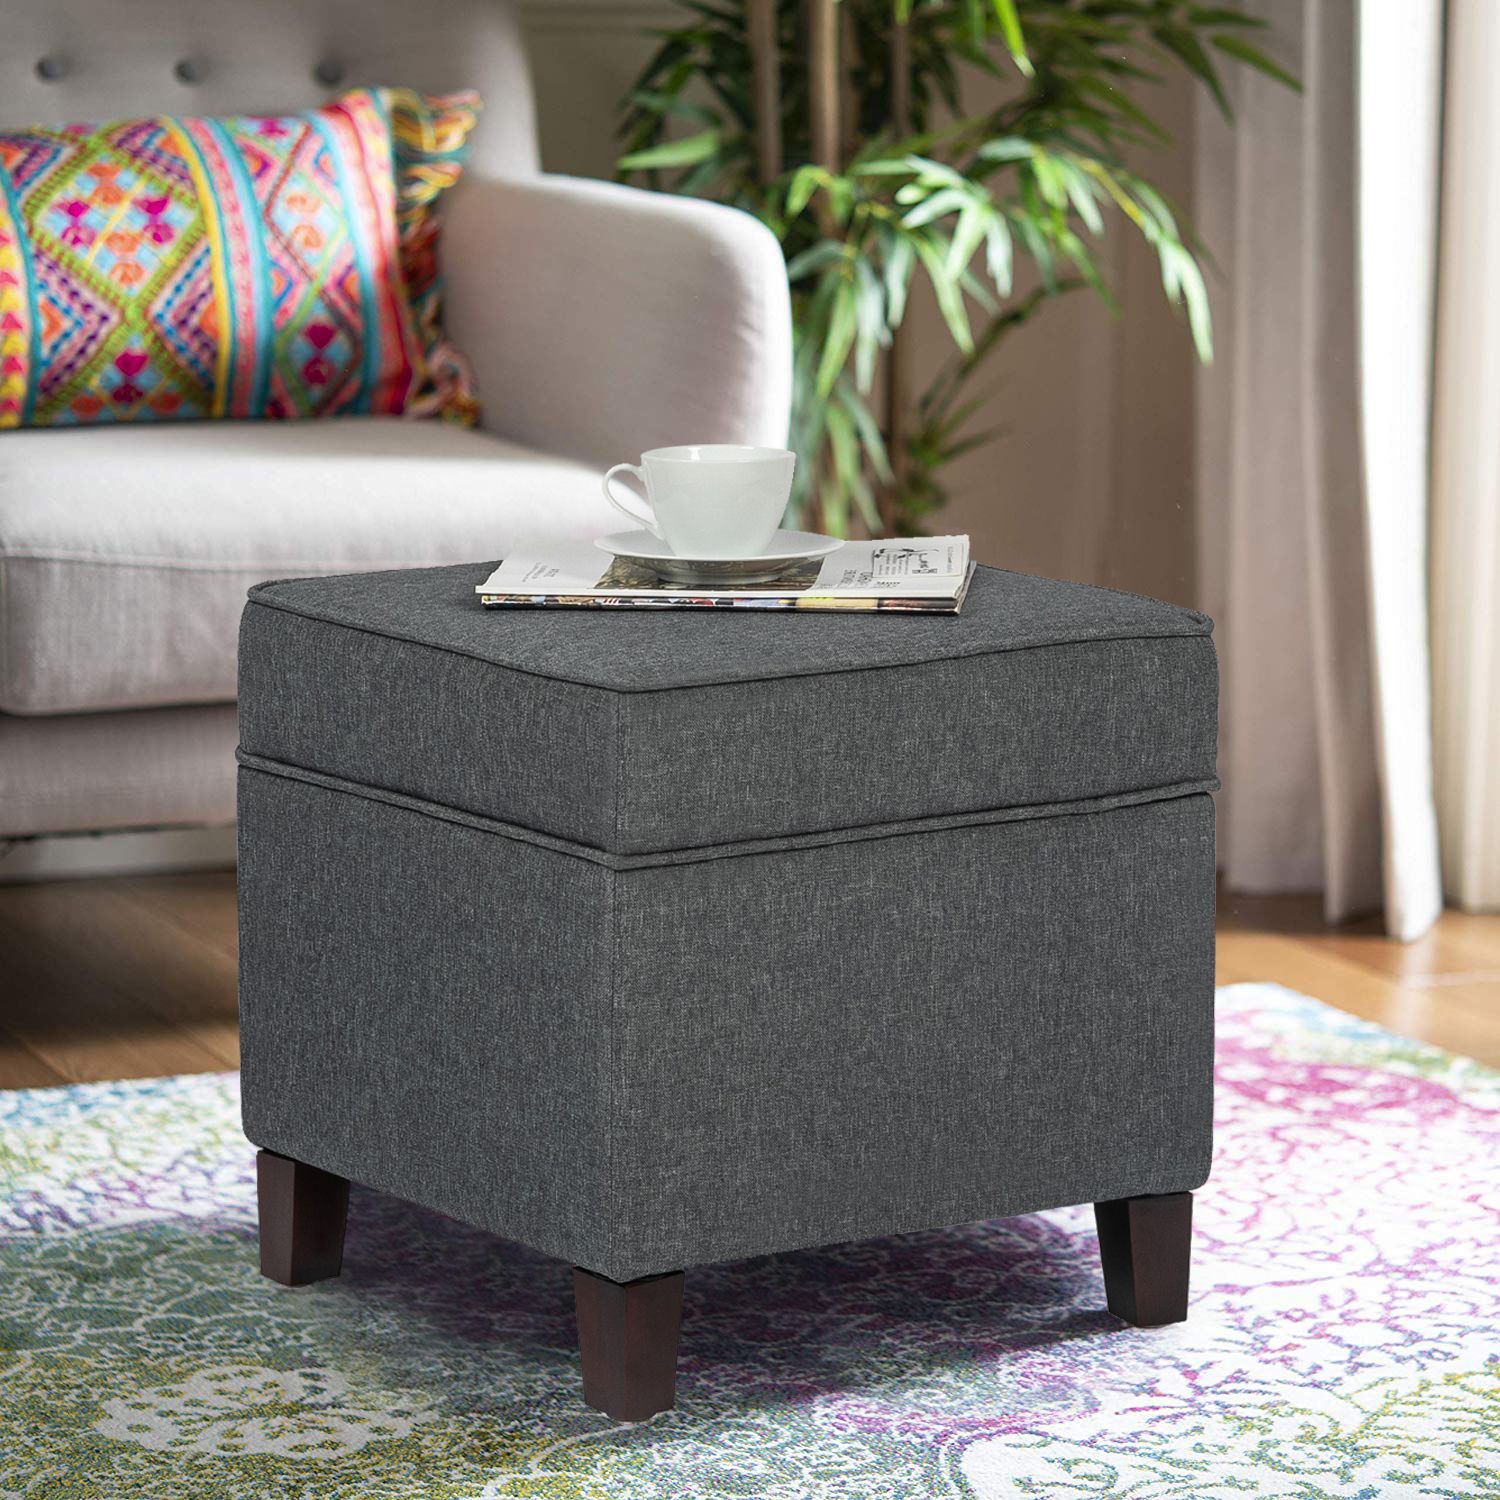 Joveco Modern Design Fabric Square Storage Ottoman With Hinge Hidden Inside Gray Fabric Oval Ottomans (View 2 of 20)